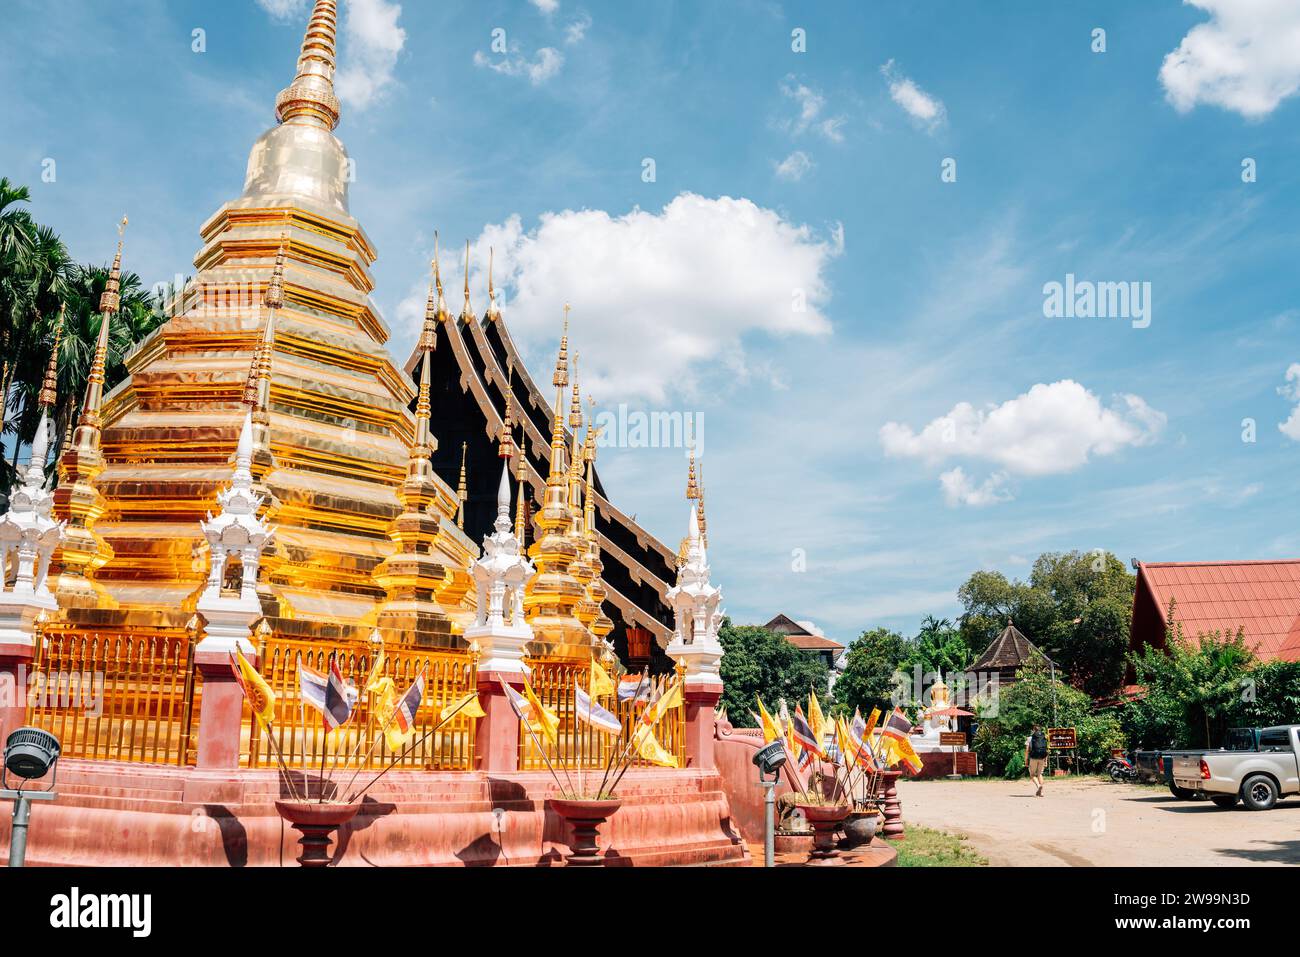 Old town Wat Phan Tao temple in Chiang Mai, Thailand Stock Photo